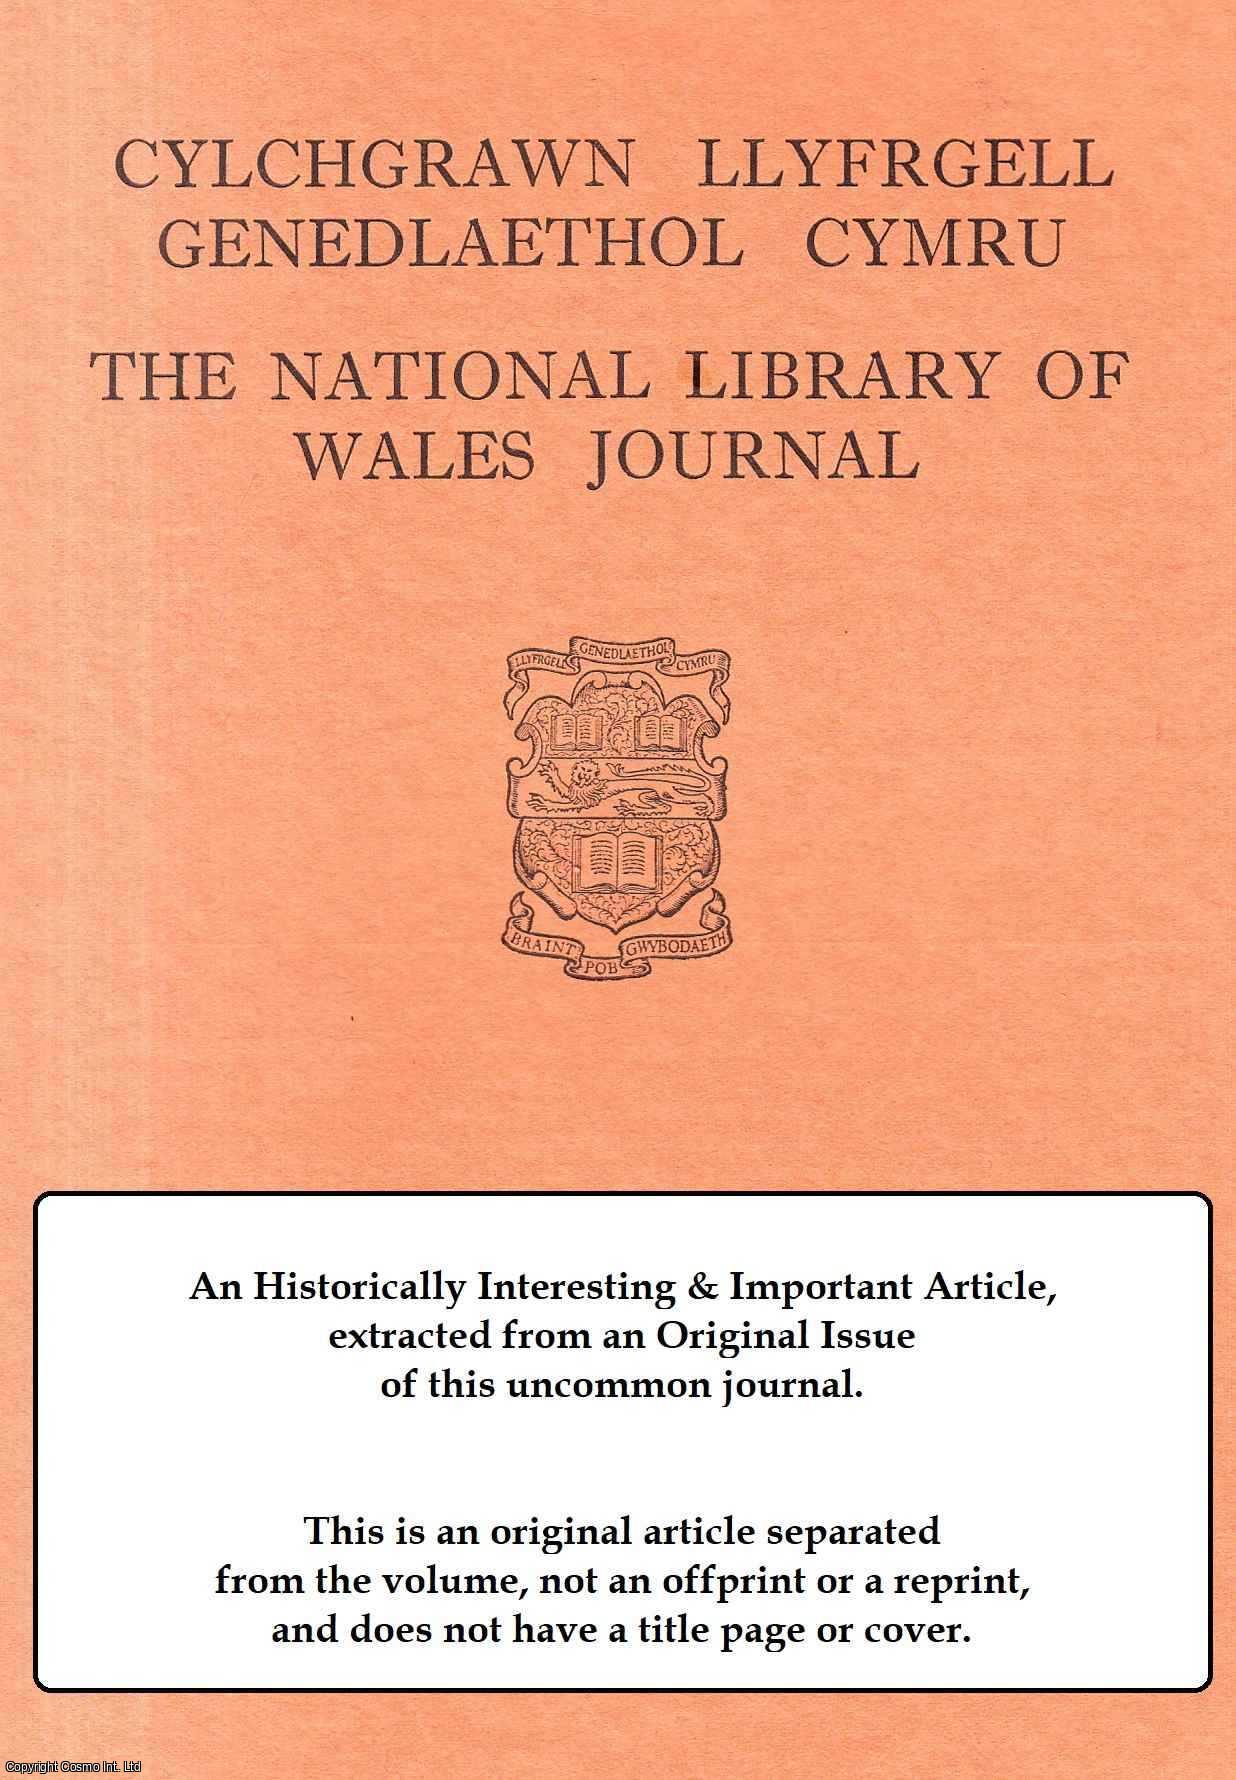 Peter C. Bartrum - Disgyniad Pendefigaeth Cymru (The Descent of The Sovereignty of Wales). An original article from The National Library of Wales Journal, 1970.